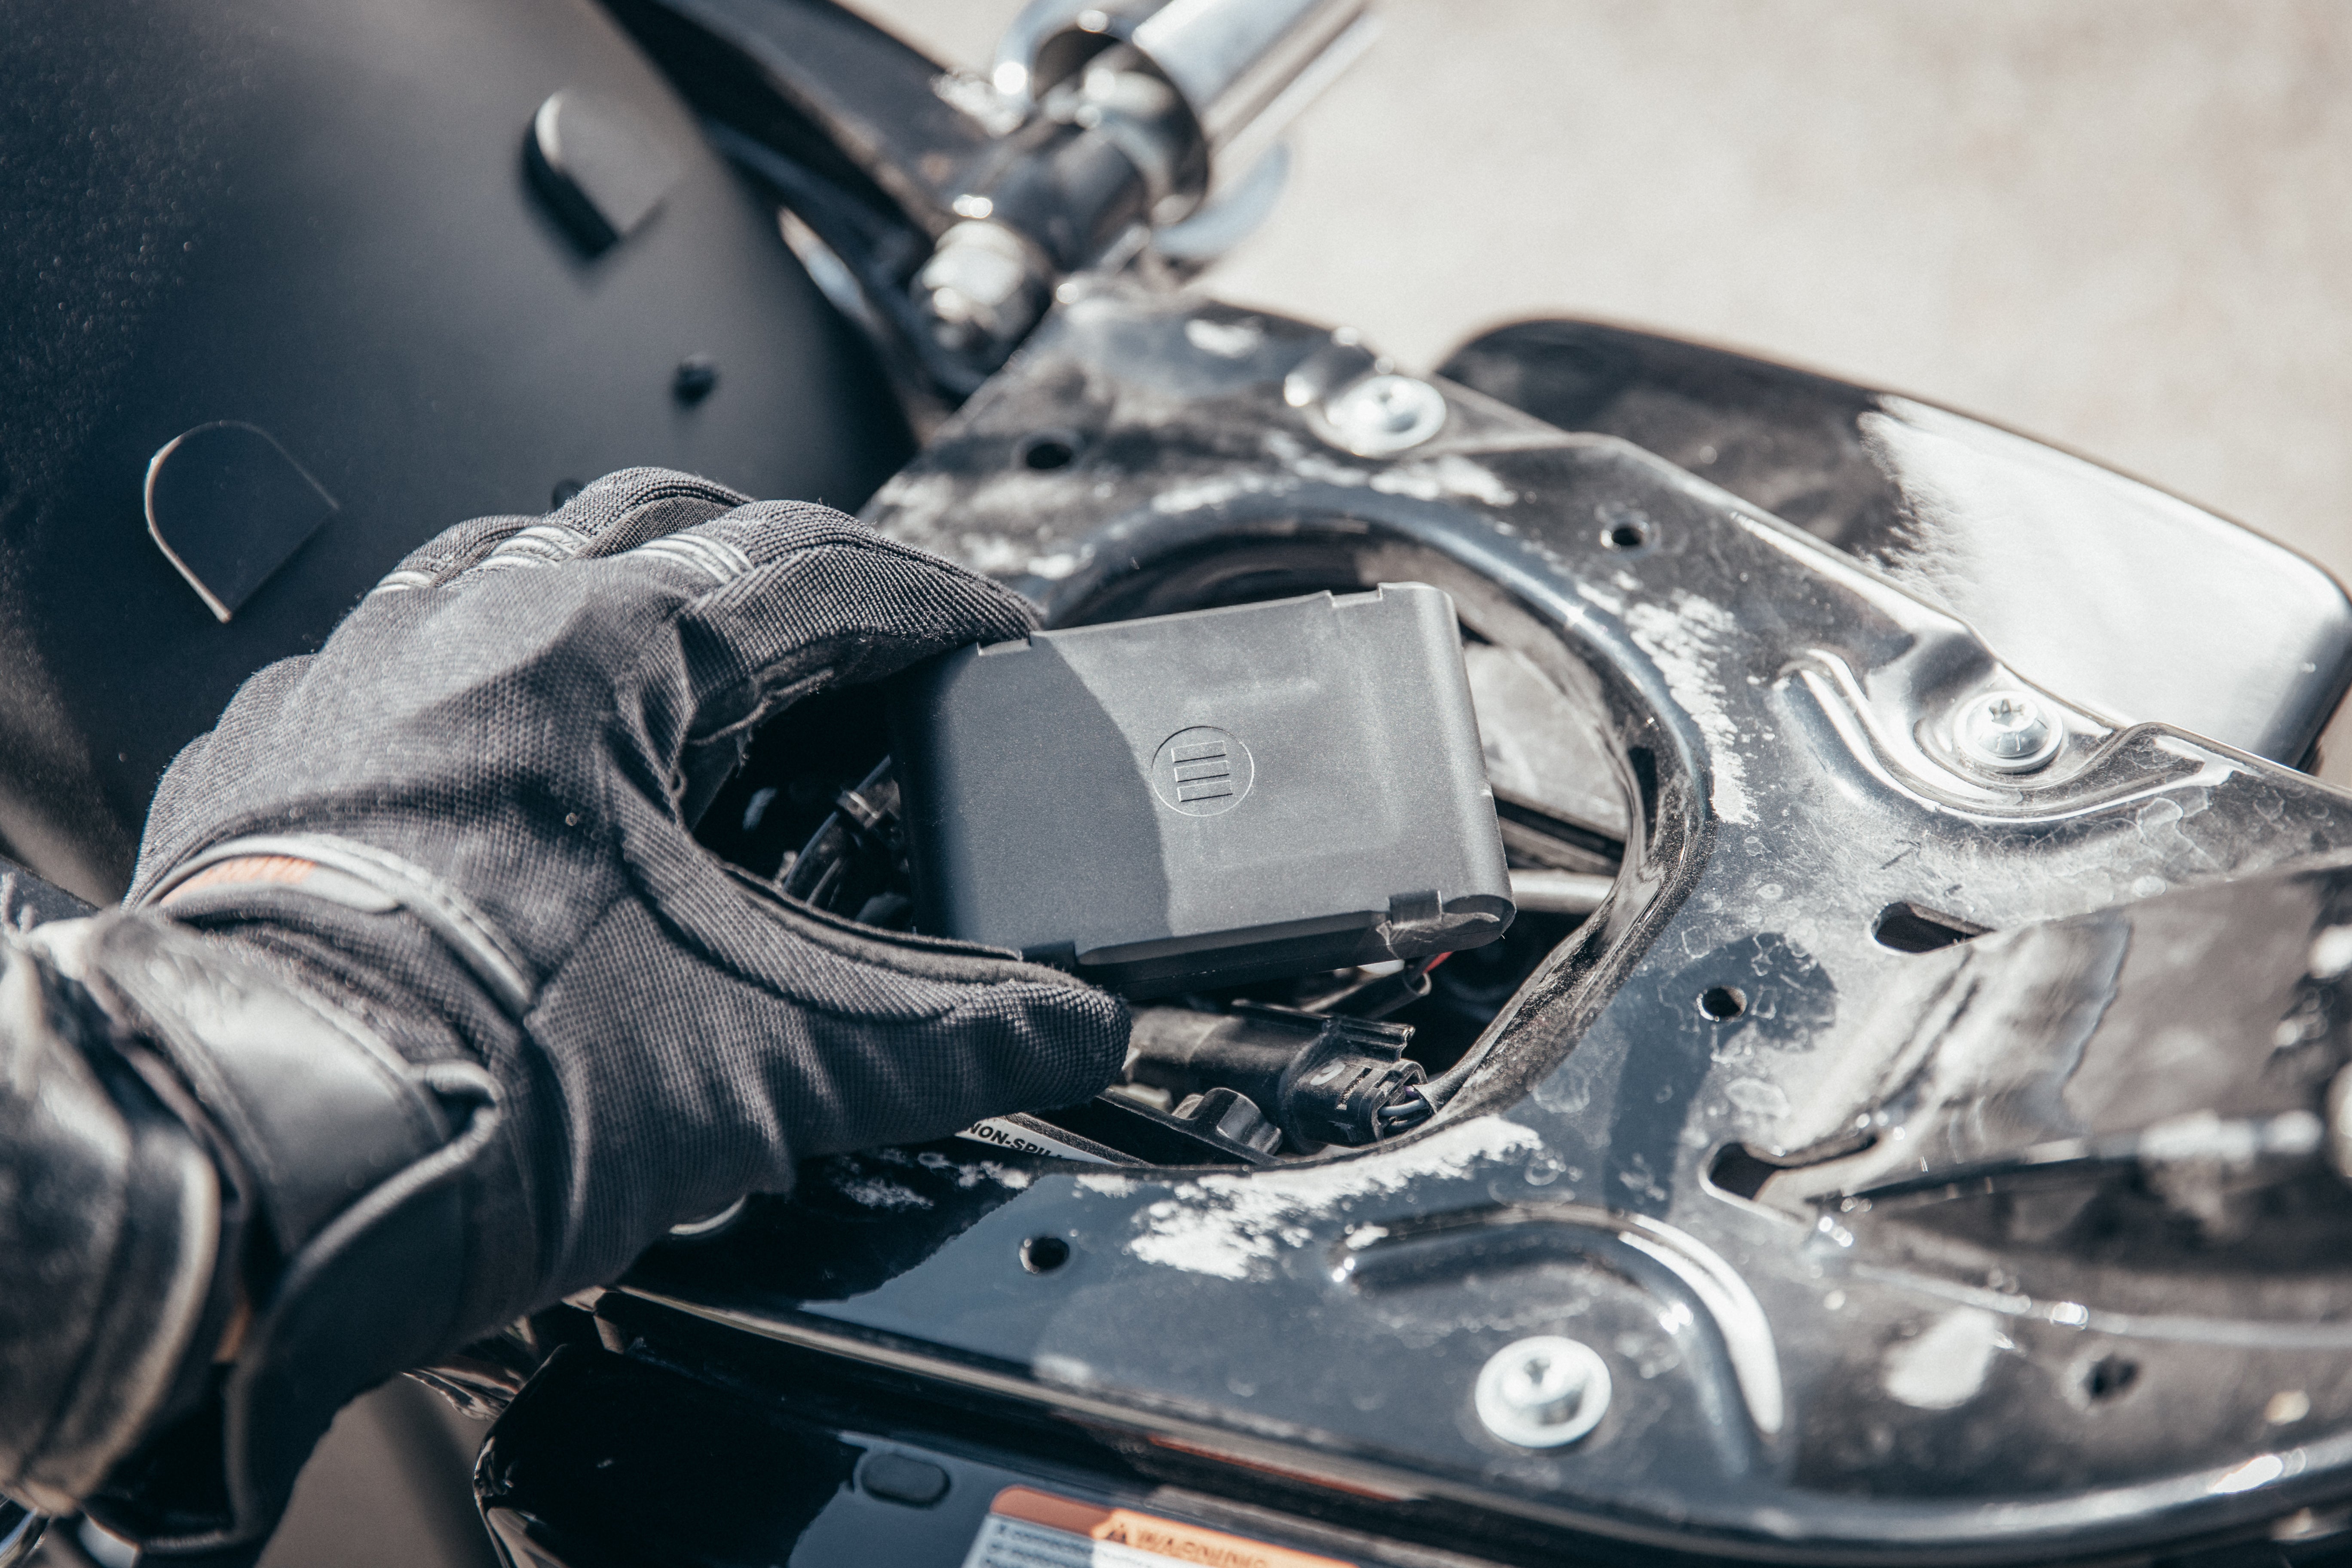 A motorcyclist&#39;s hand placing MoniMoto Motorcycle black and small GPS tracker into the motorcycle